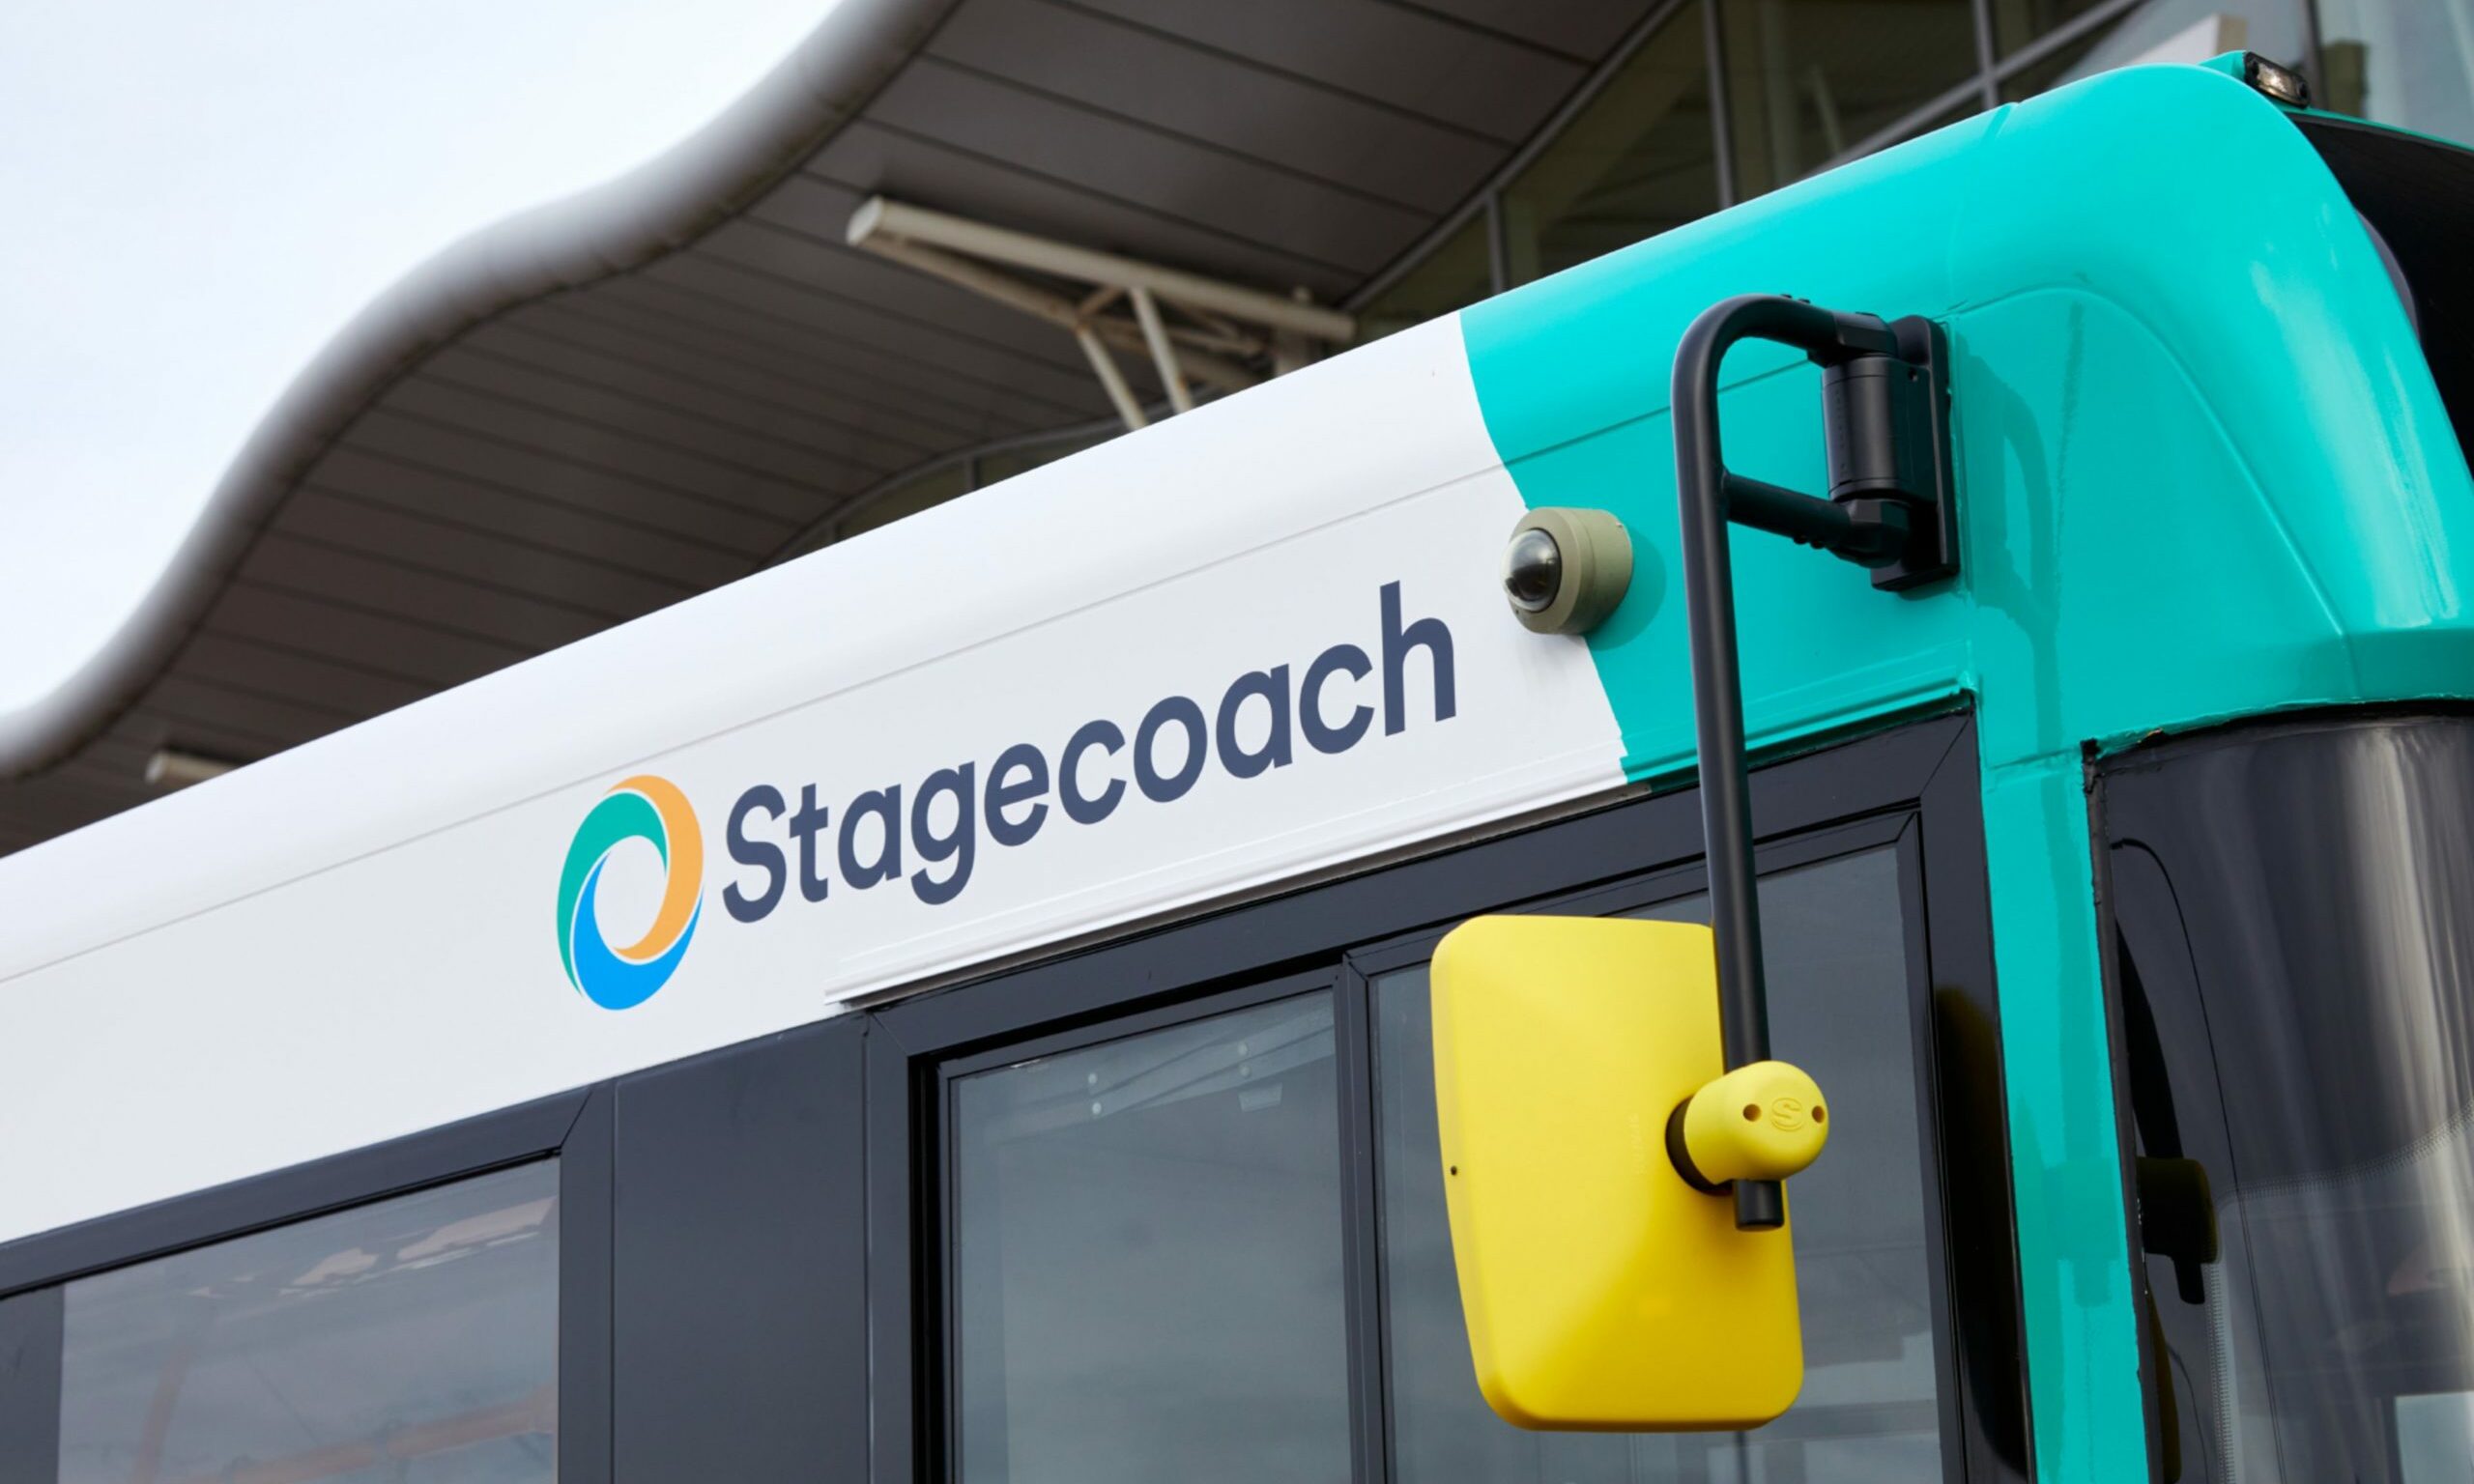 Stagecoach branding on a bus